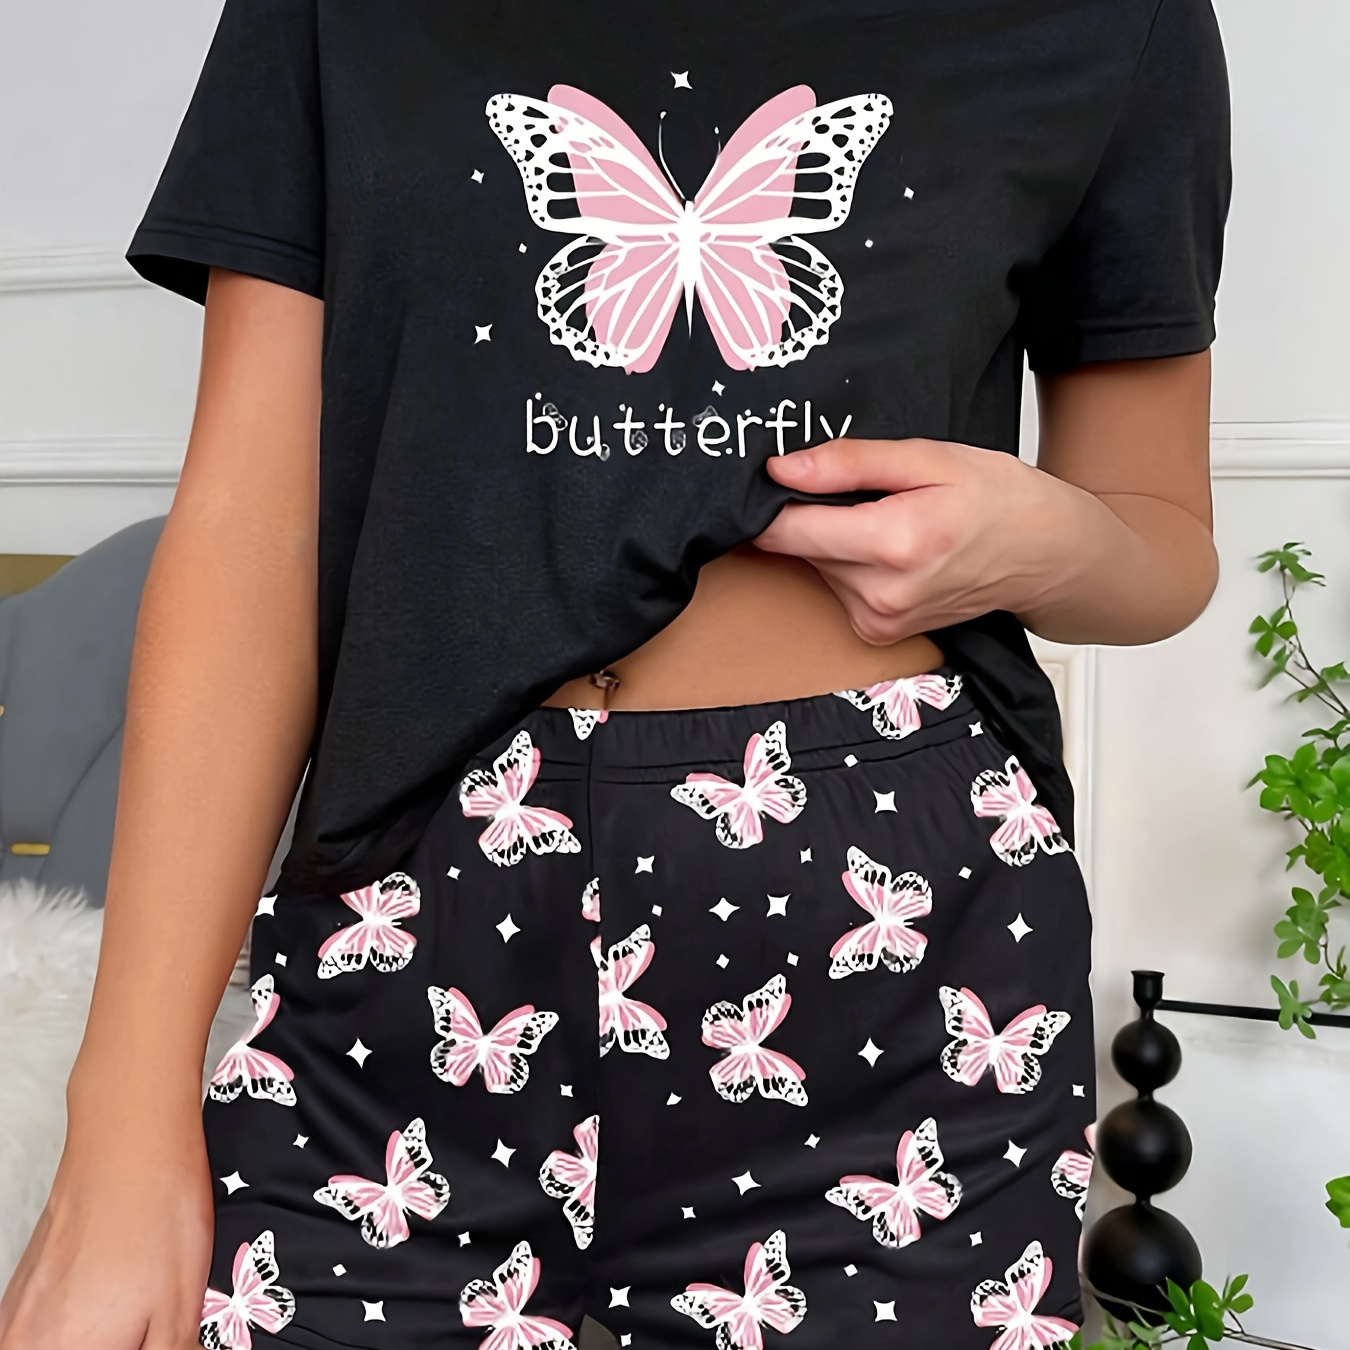 

Butterfly & Letter Print Pajama Set, Casual Short Sleeve Round Neck Top & Elastic Shorts, Women's Sleepwear